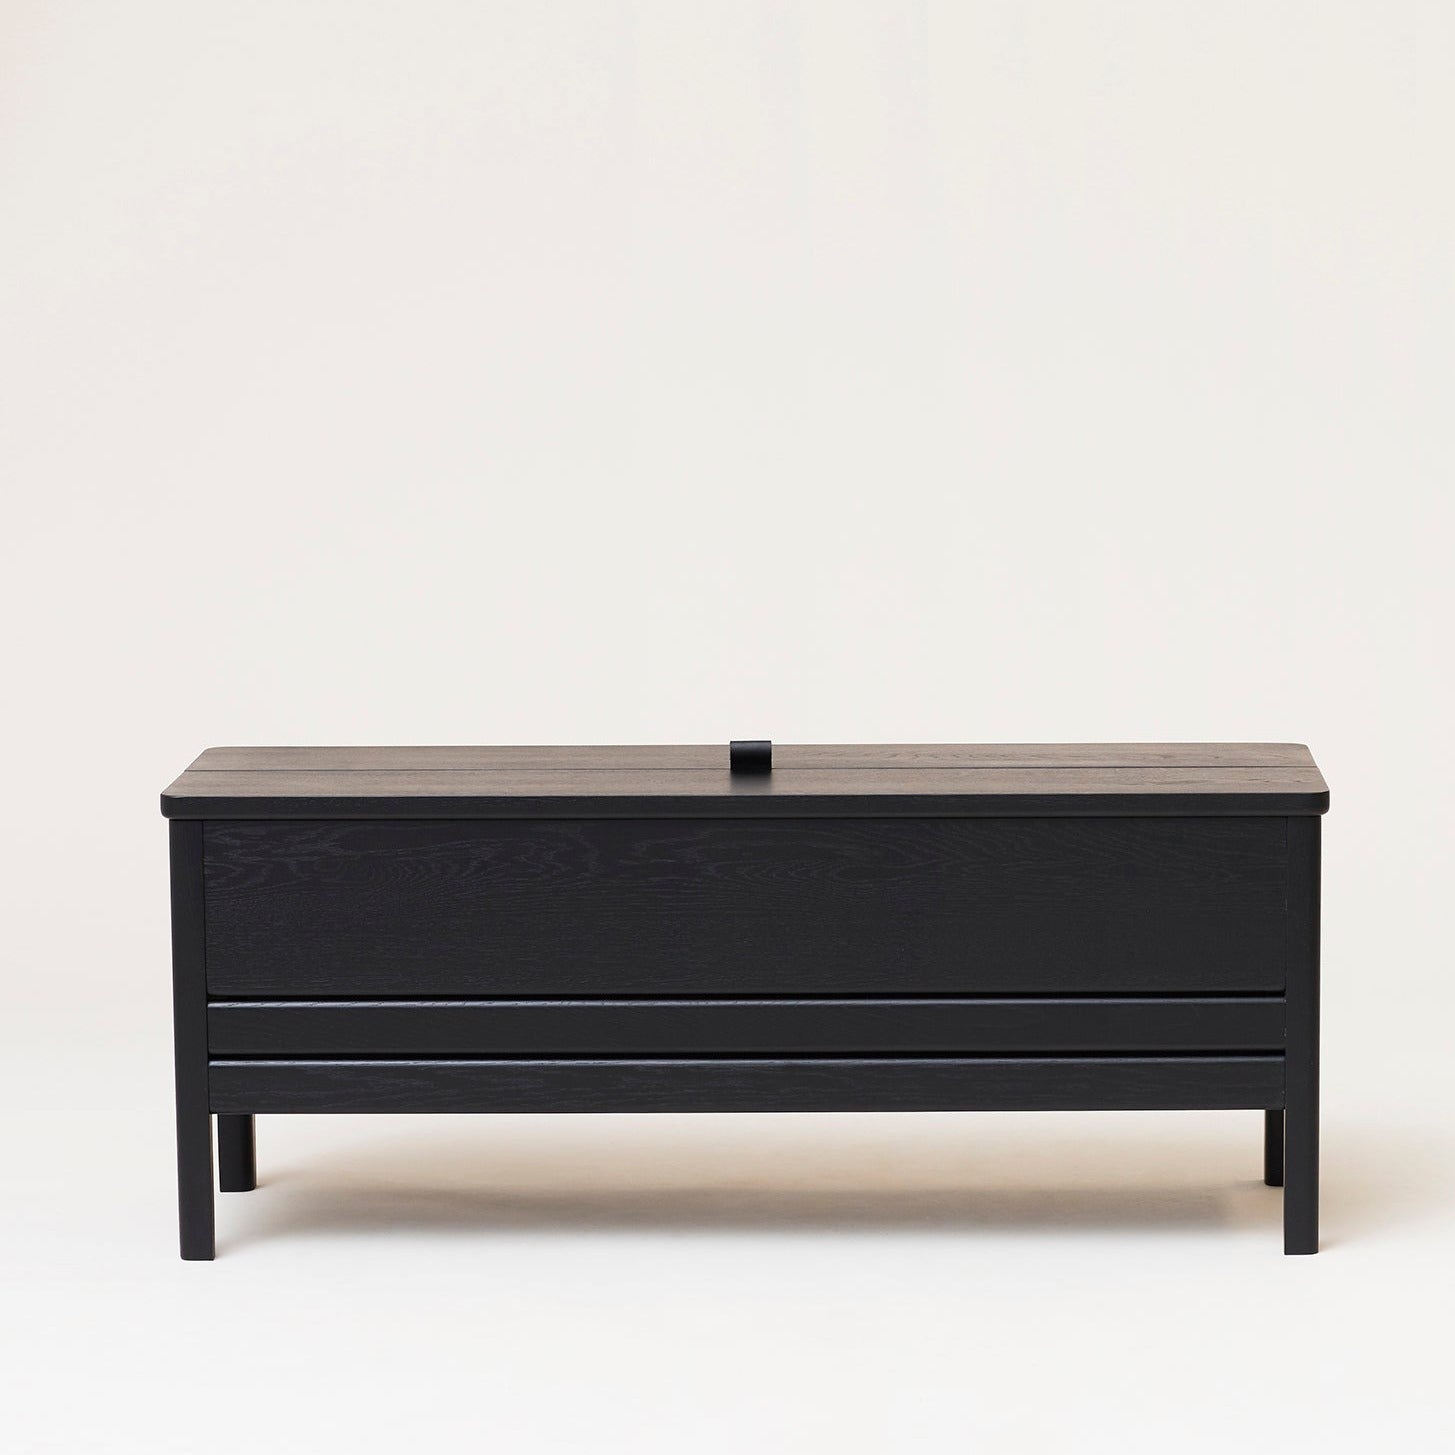 A LINE Storage Bench black stained oak, 111 cm length